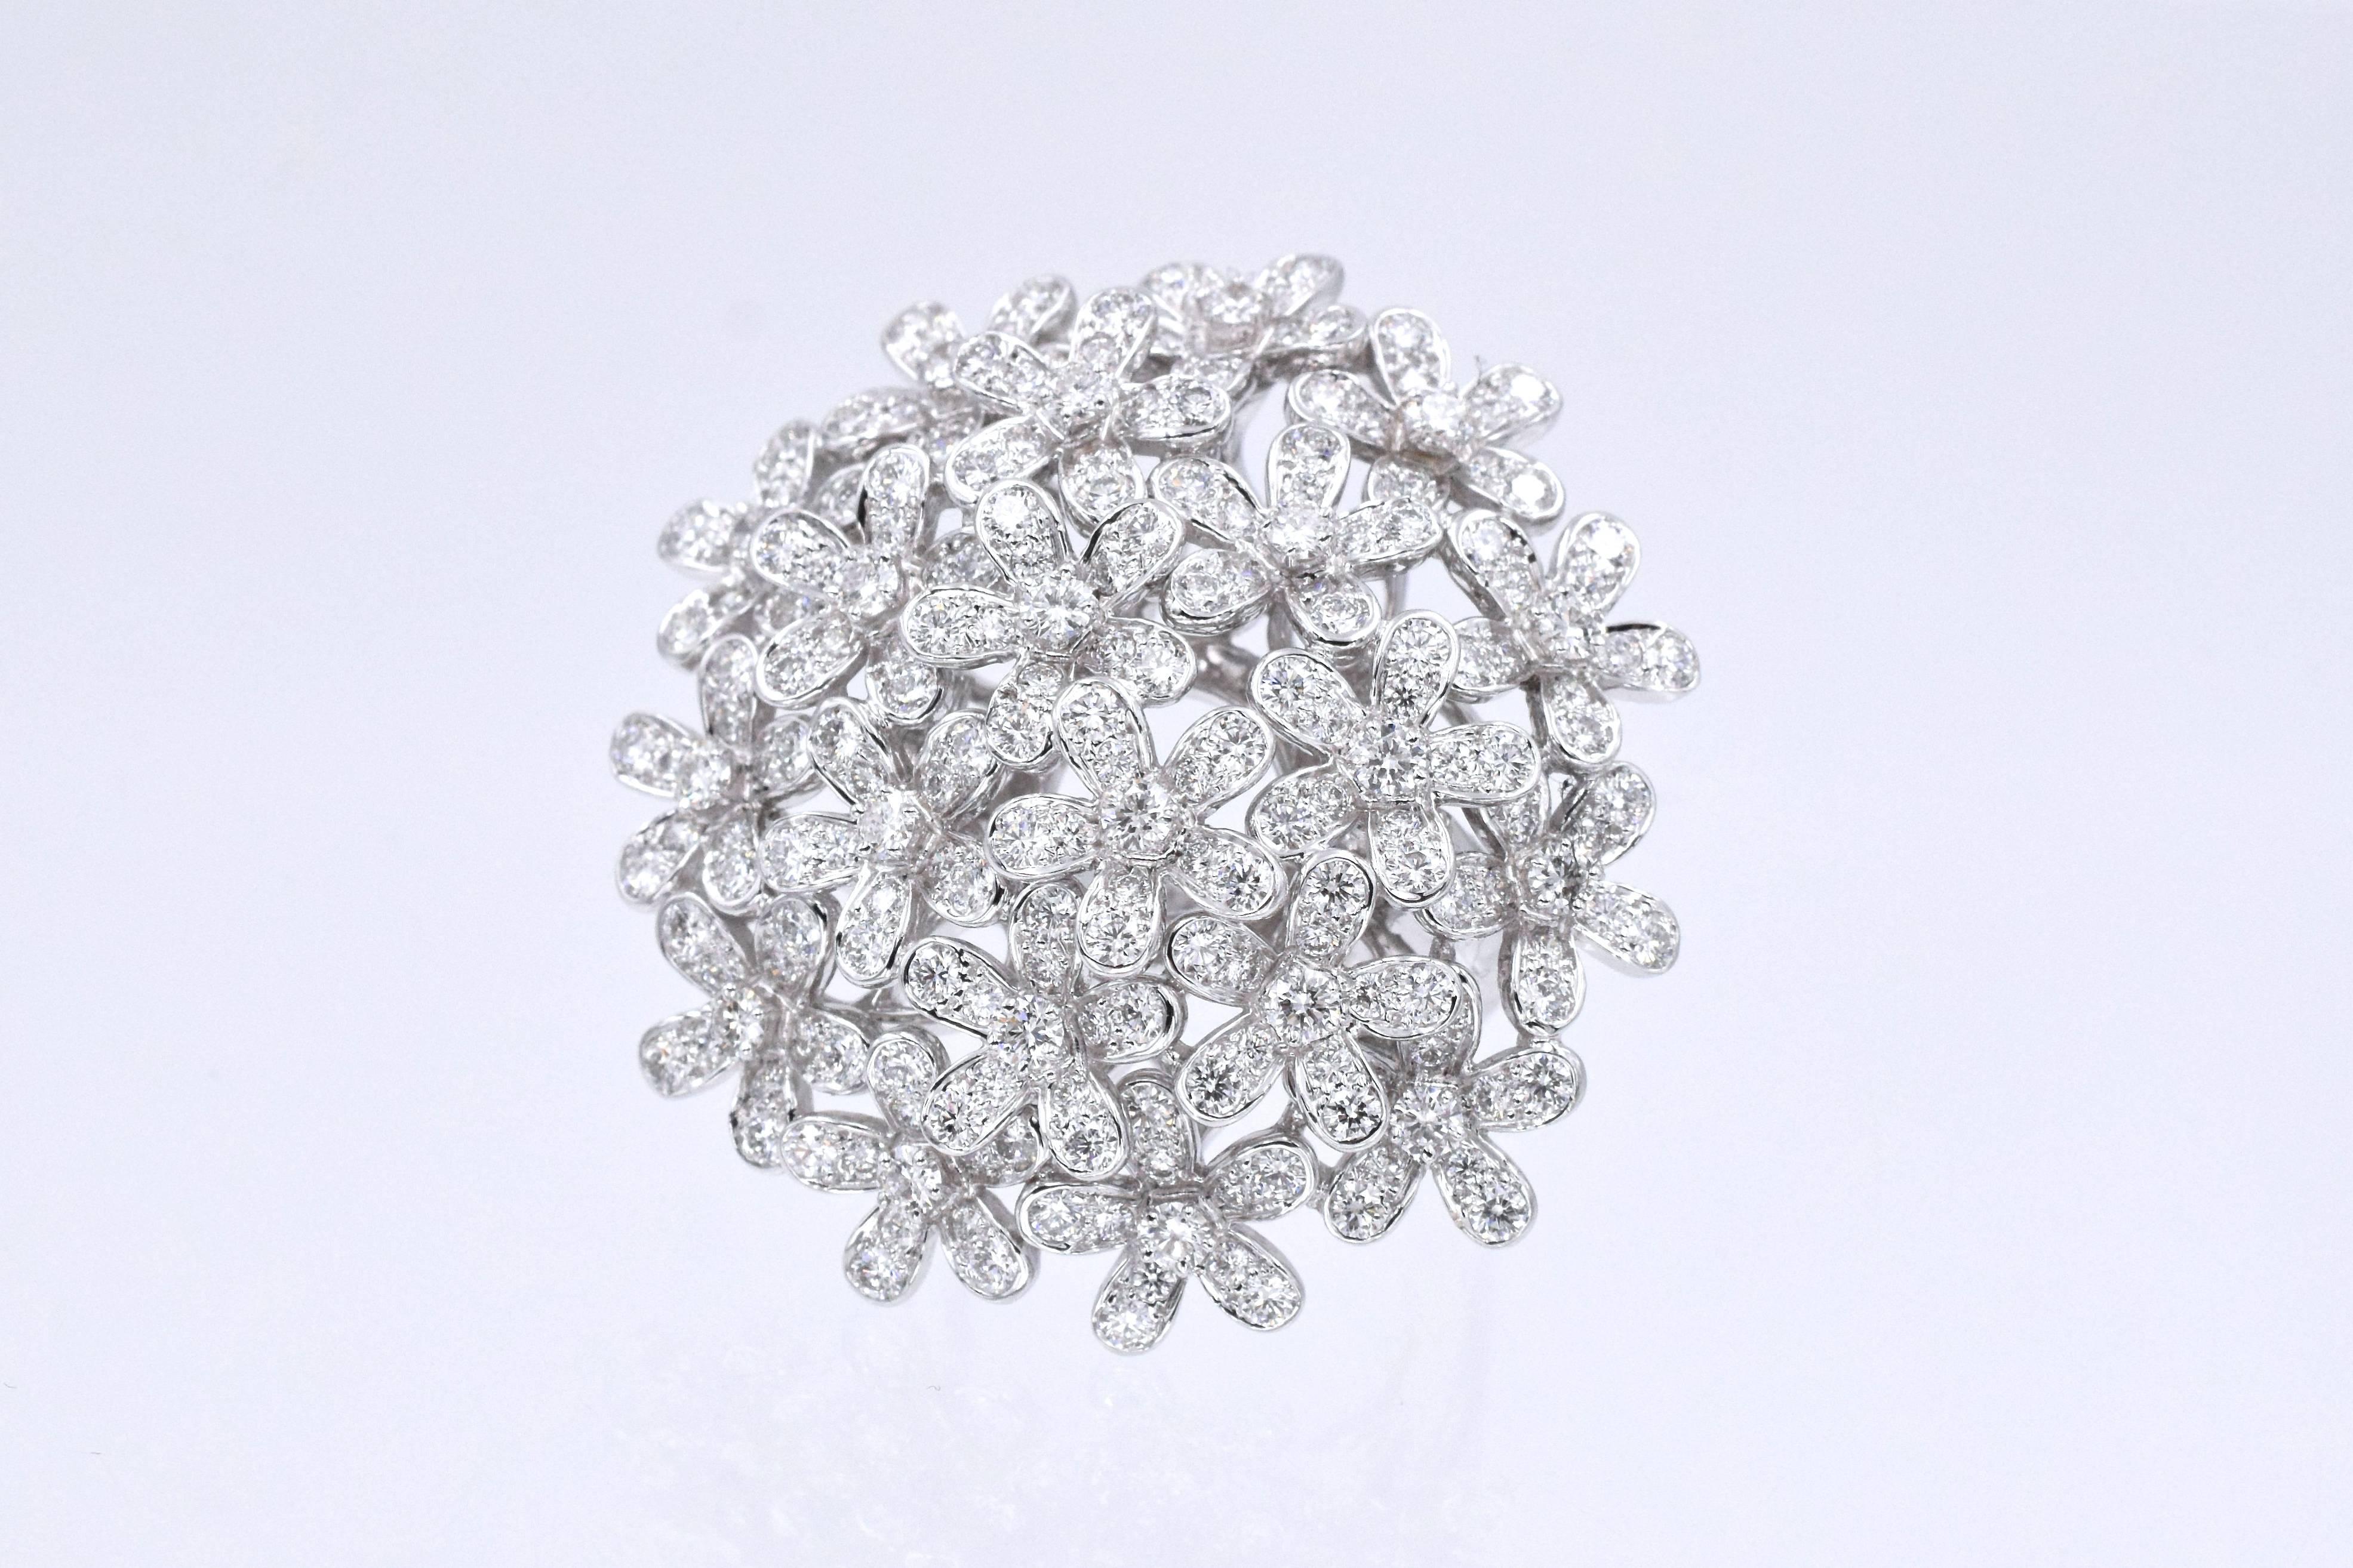 Van Cleef and Arpels 'Socrate Bouquet' Diamond Ring
This 18k white gold ring has about 132 round brilliant cut diamonds with a total carat weight of approximately 3ct. 
Signed VCA 750, Serial No. BL236970. 
Ring size 52 (6.25)
(Current retail price